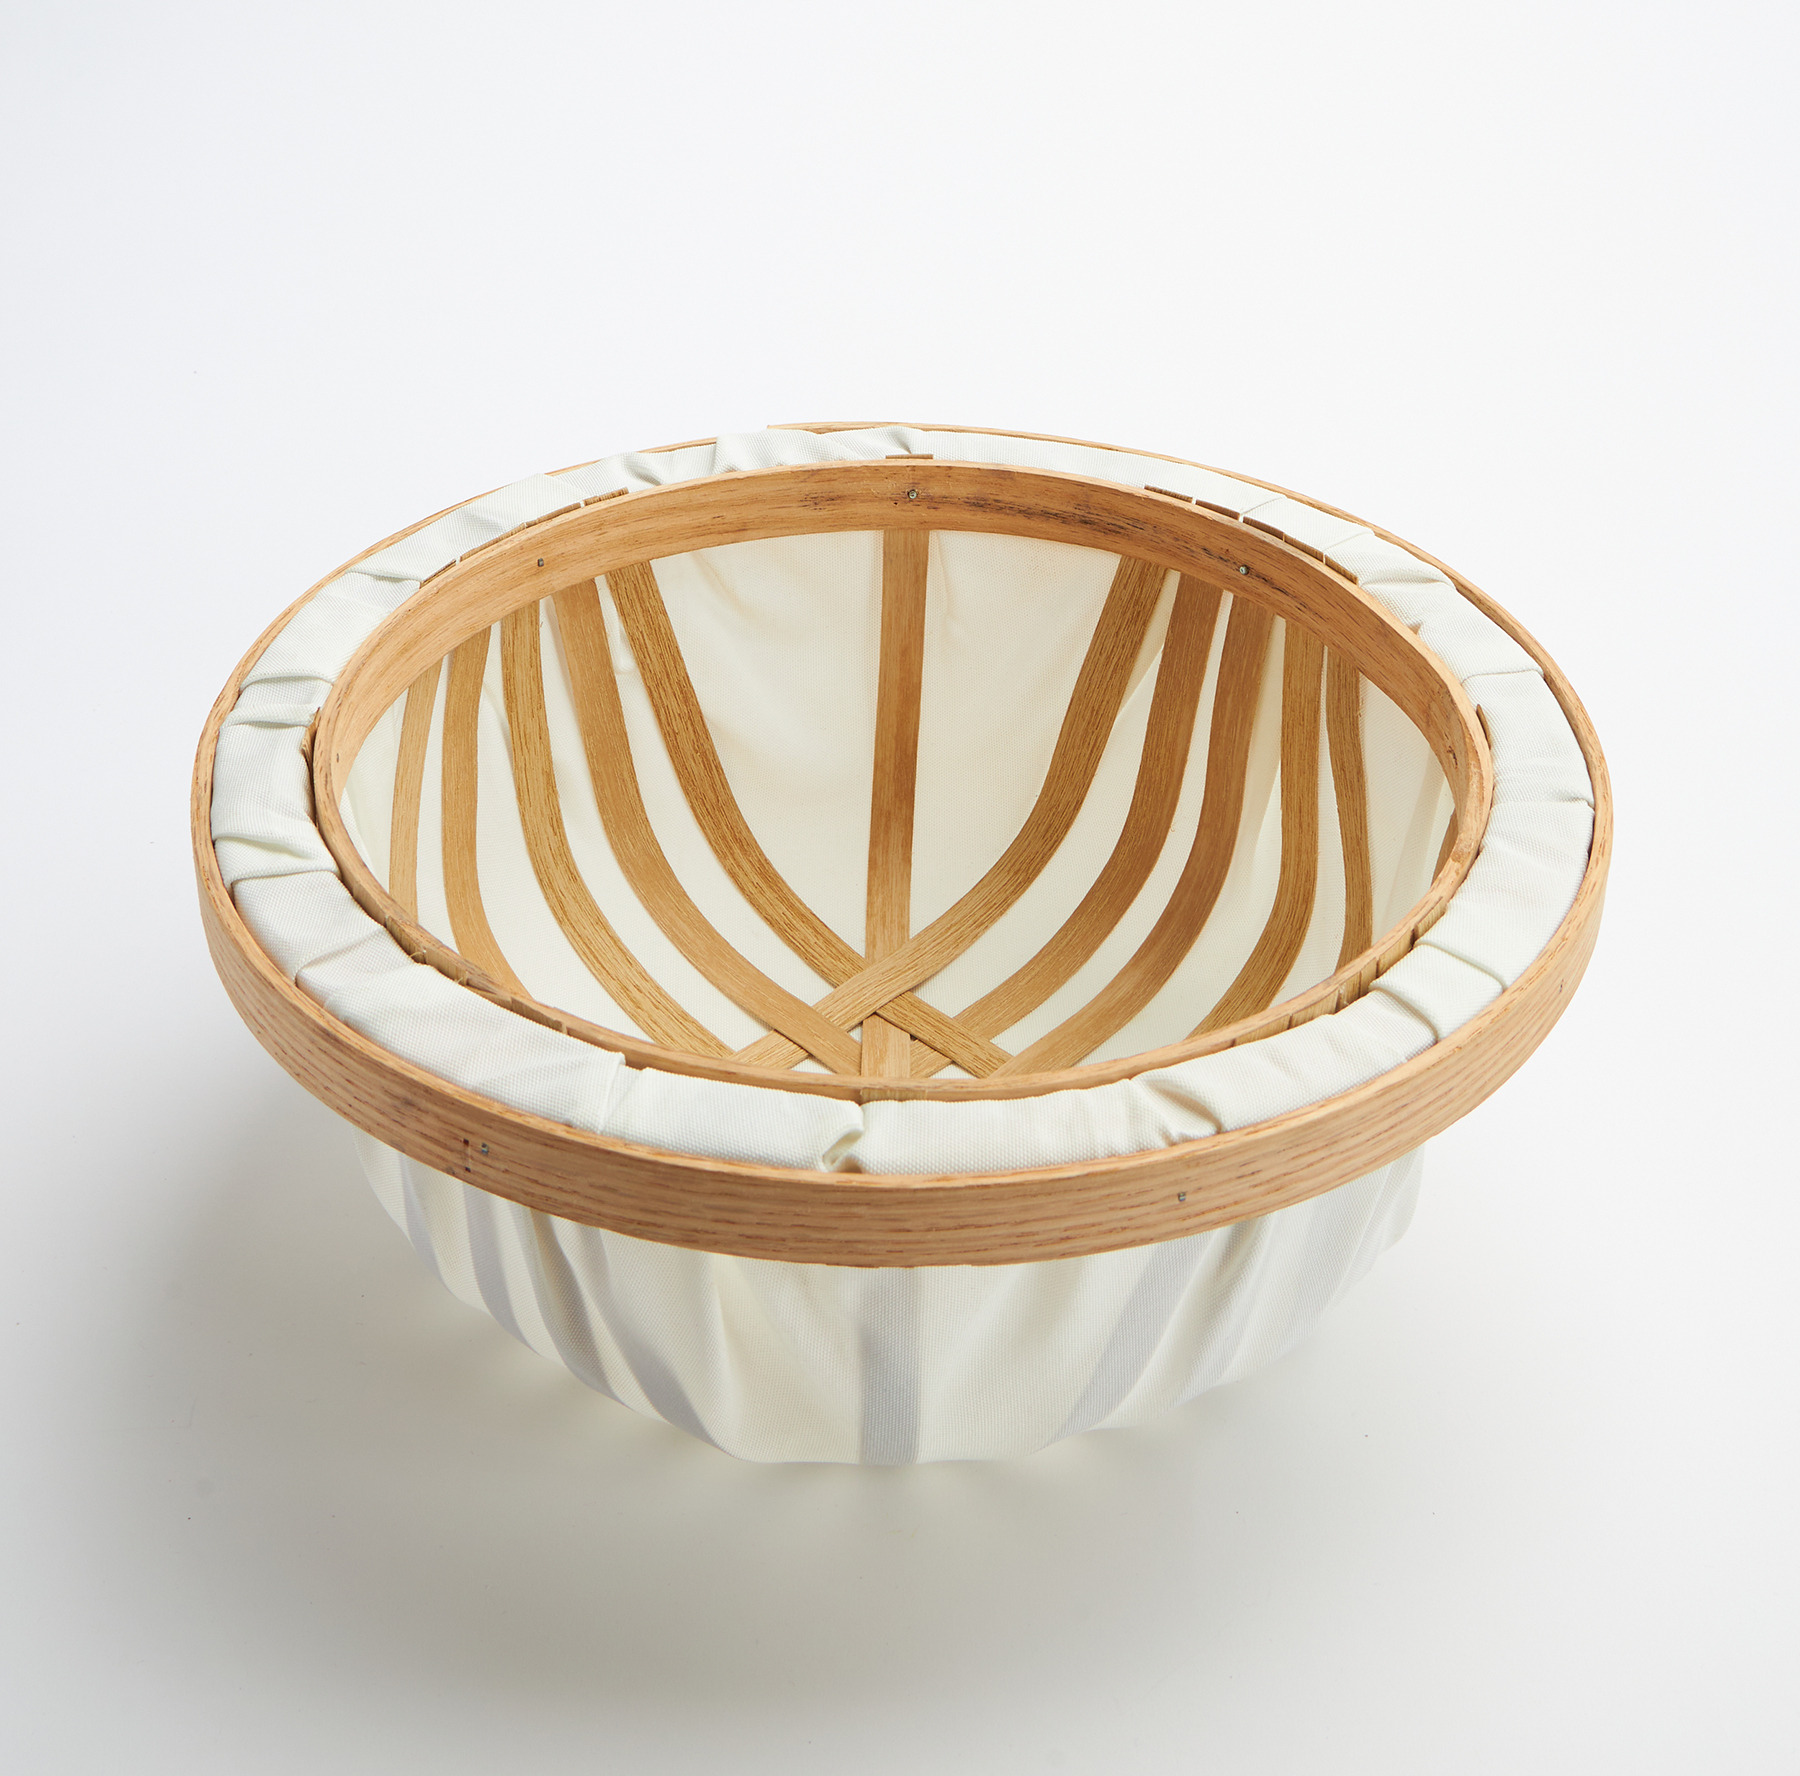 A bowl made of wood.